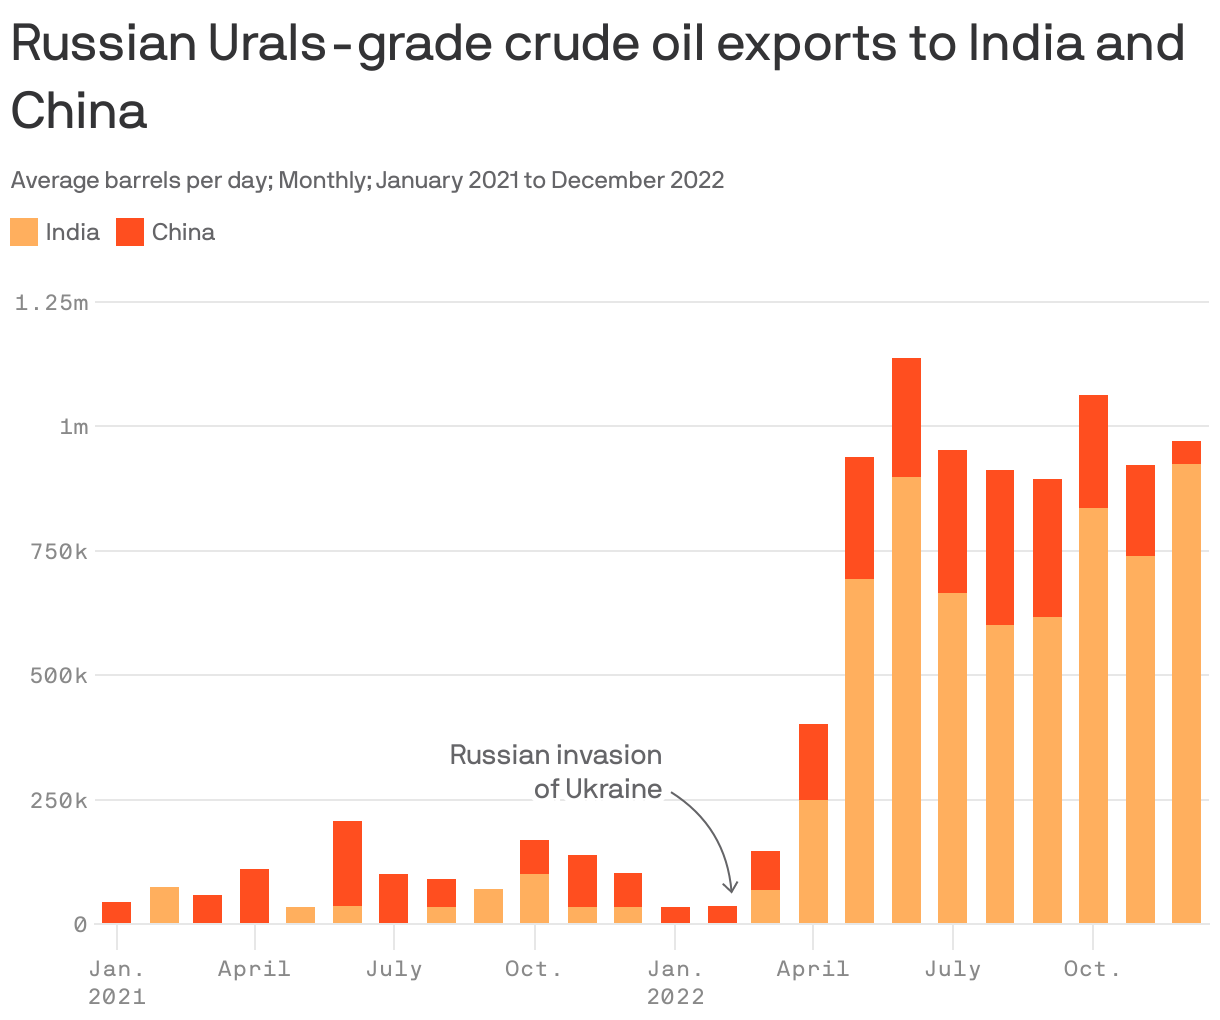 Russian Urals-grade crude oil exports to India and China
